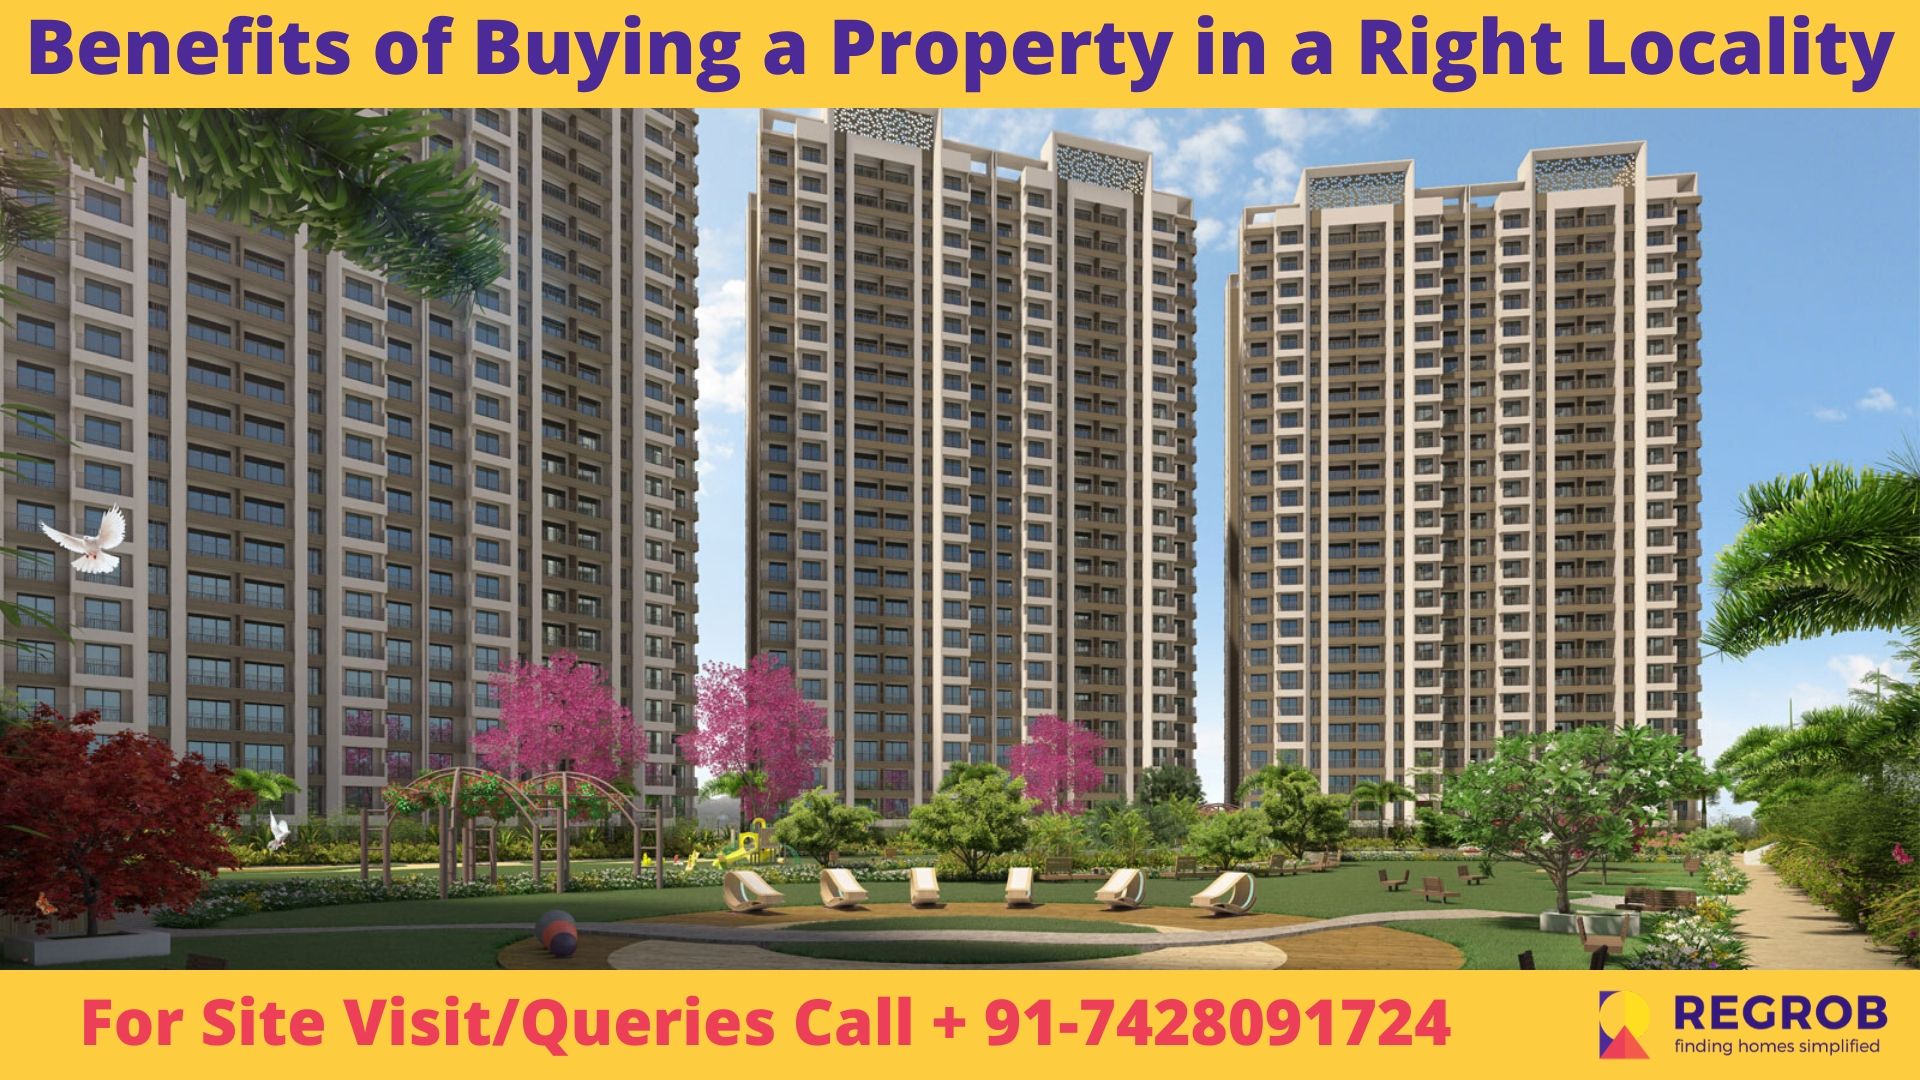 Benefits of Buying a Property in a Right Locality